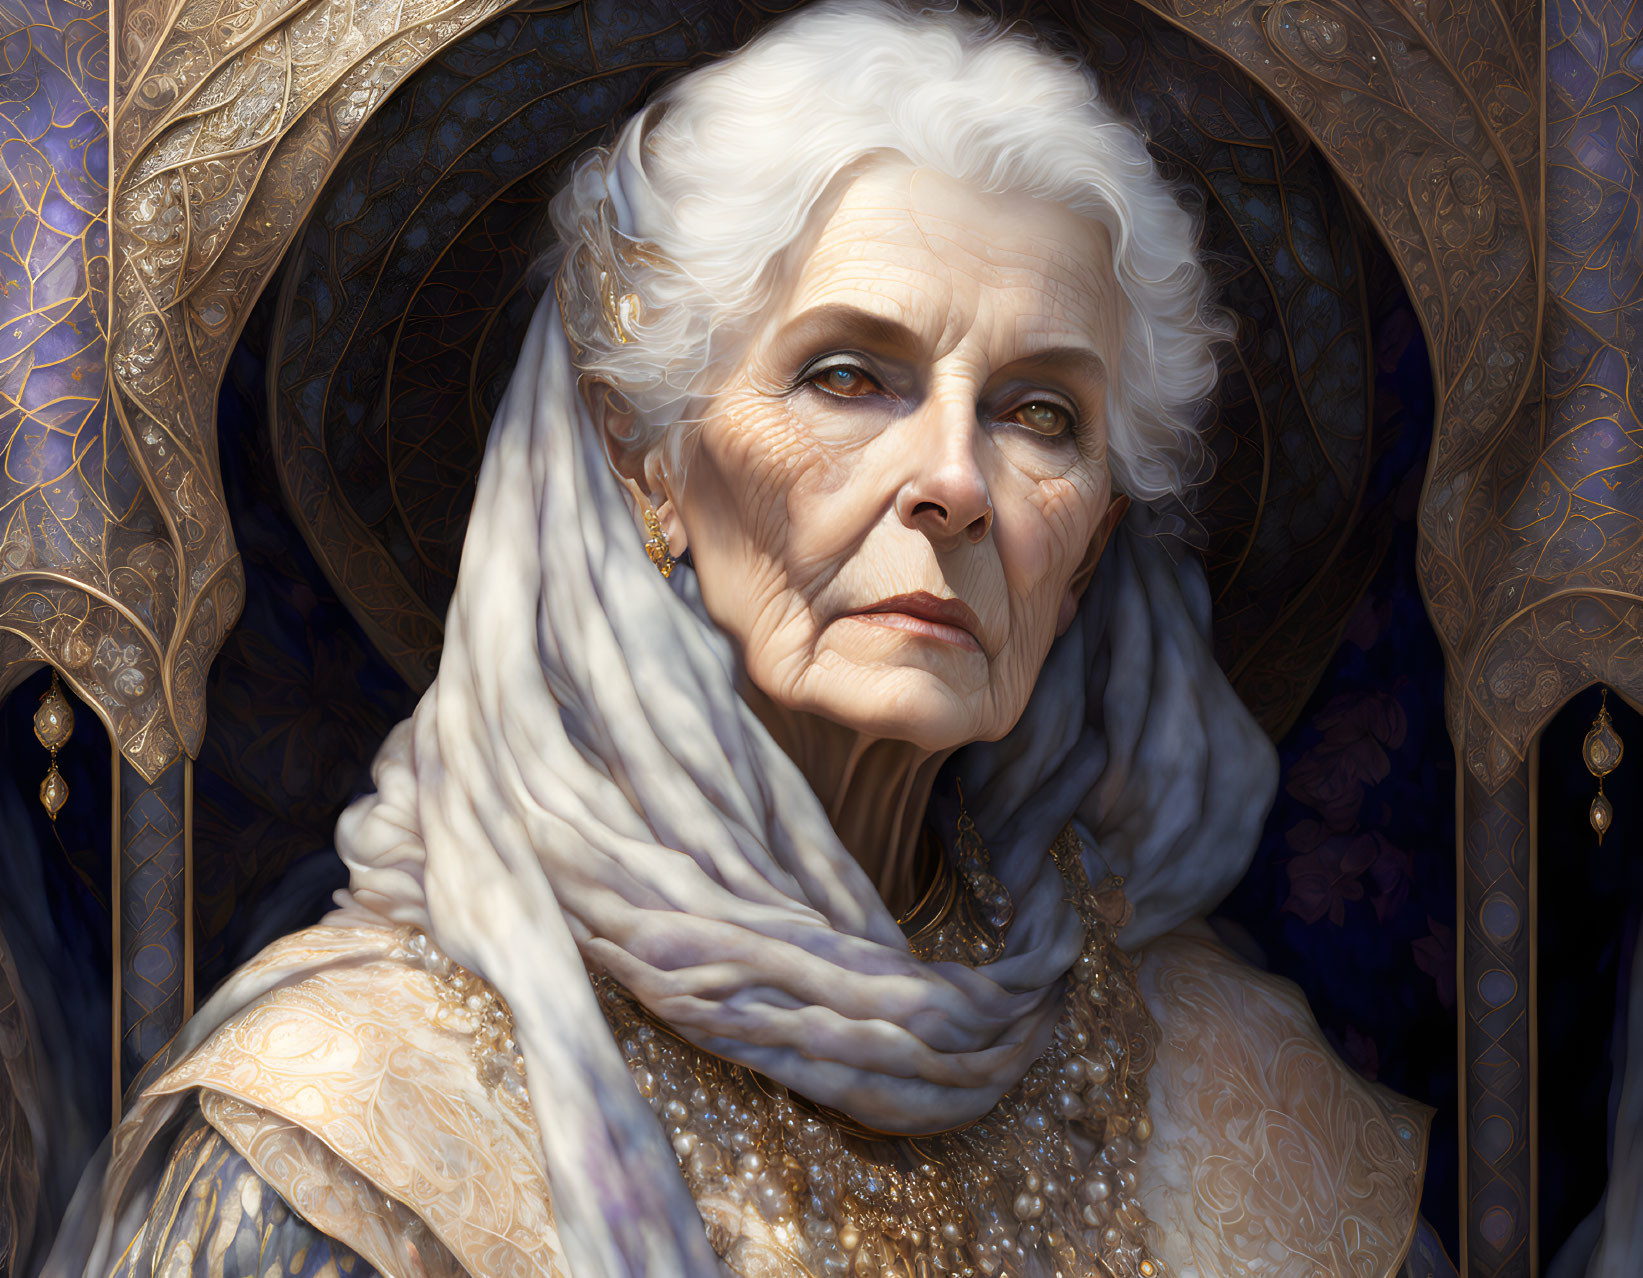 Elderly woman with white hair, gold necklace, and luxurious scarf in front of golden arch